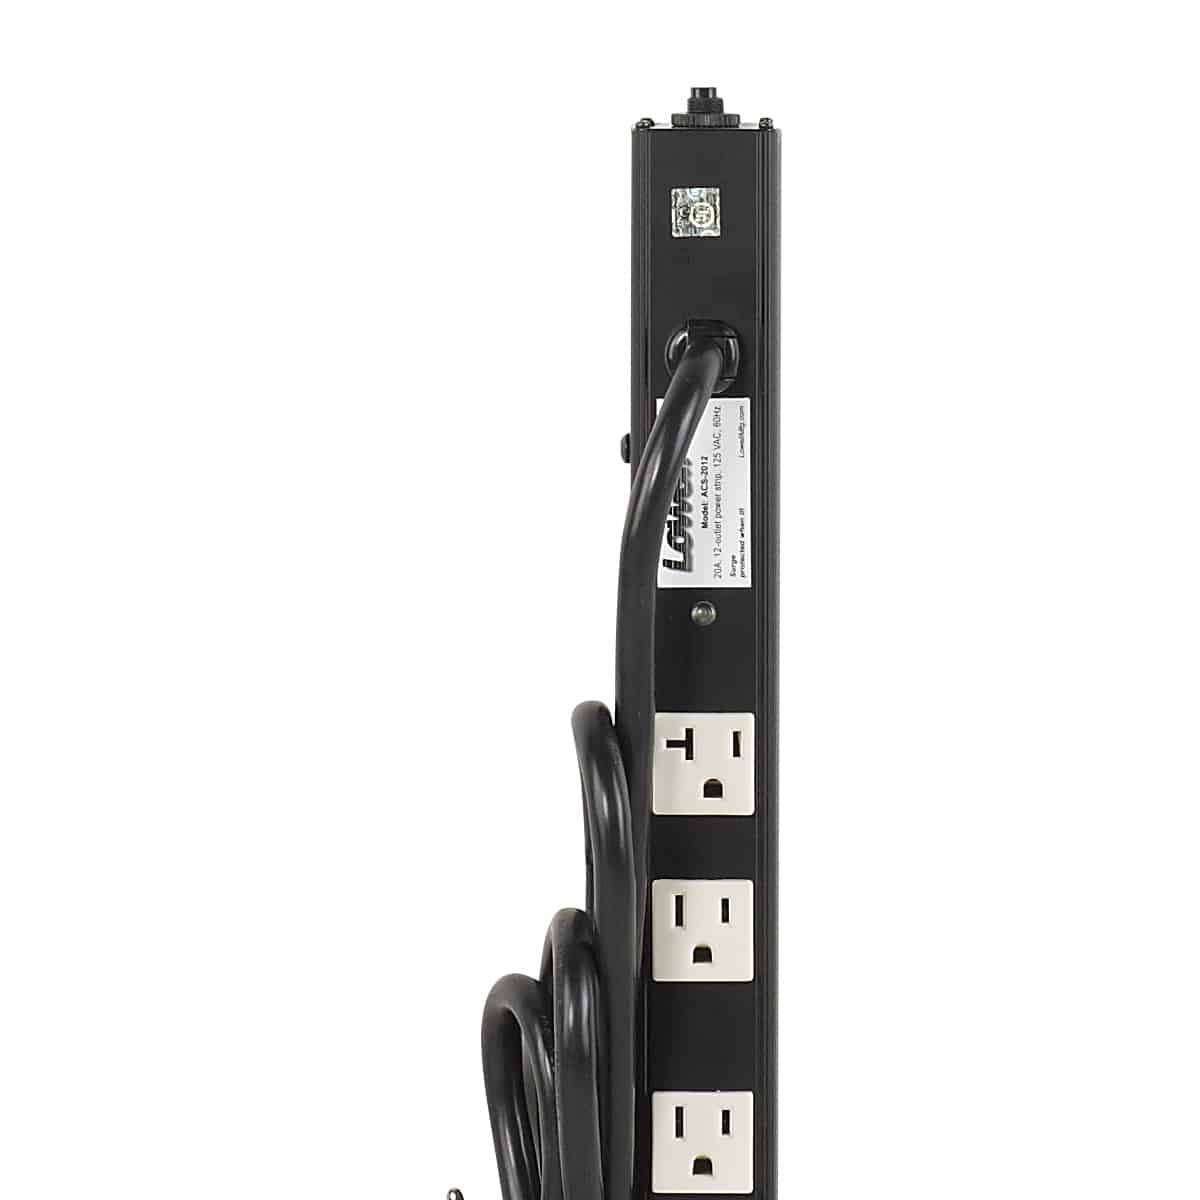 Lowell ACS-2012 Power Strip with Surge Suppression 20A, closeup